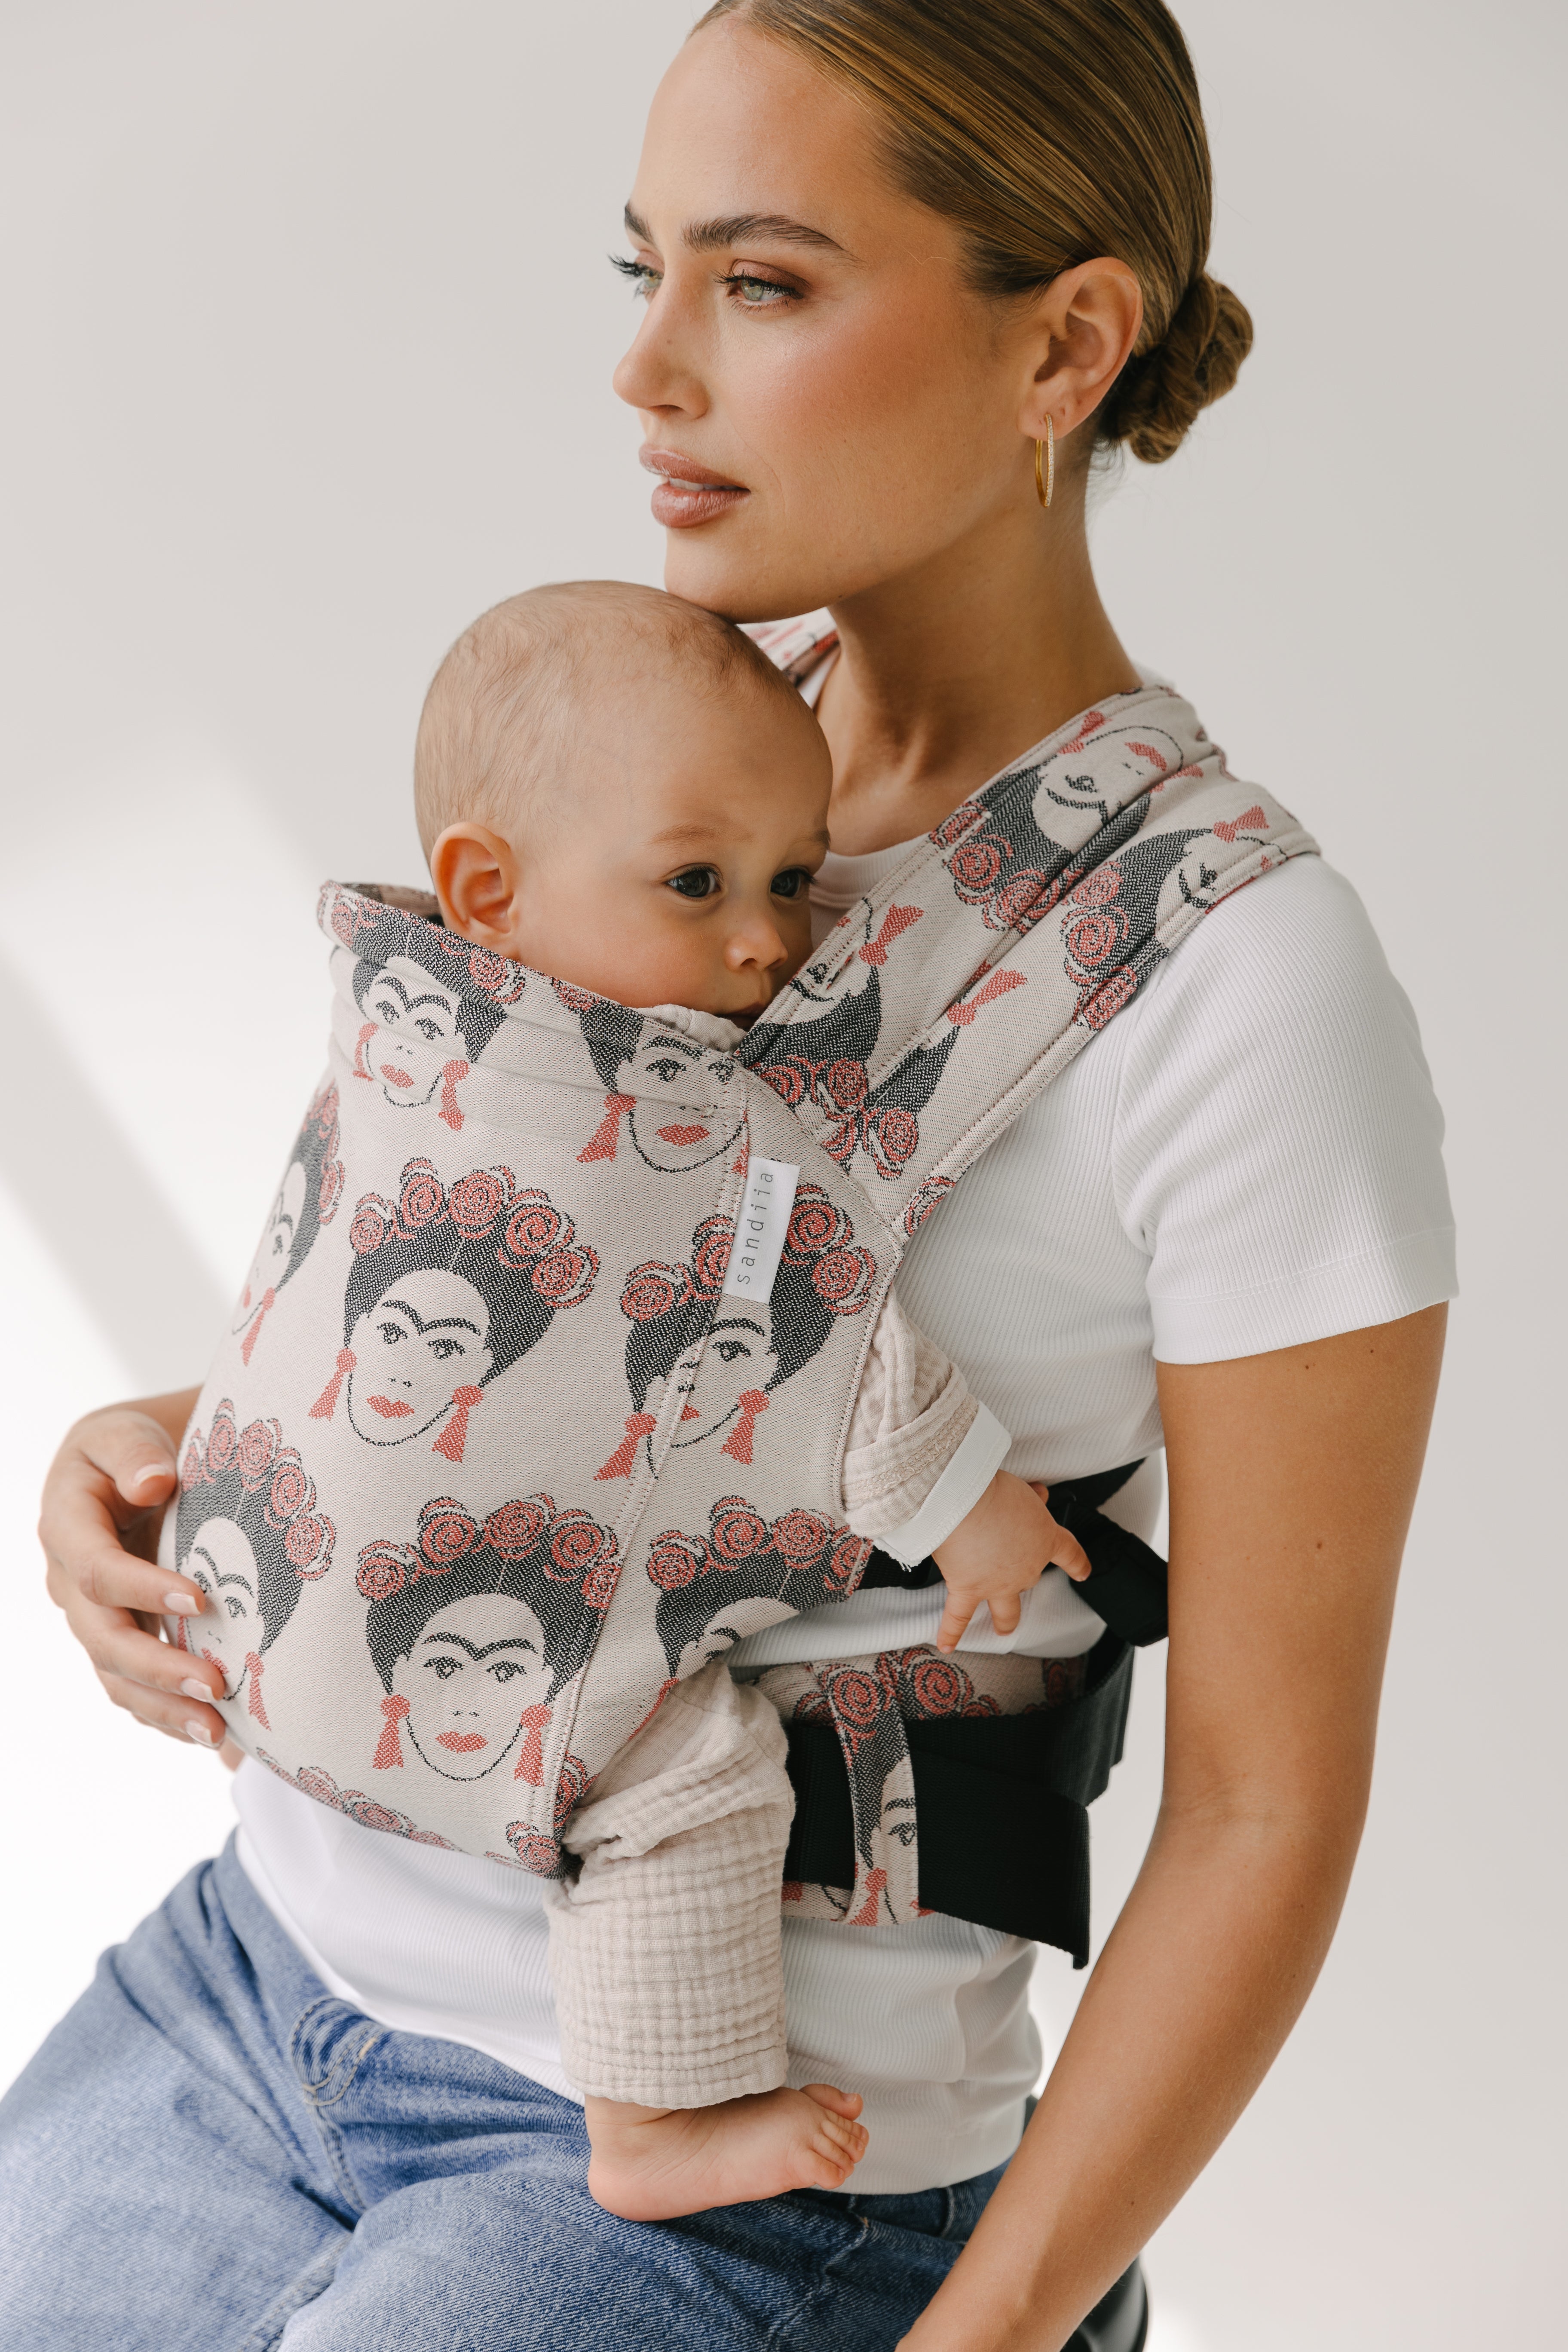 sandiia® Tiimeless Friida baby carrier without shoulder pads